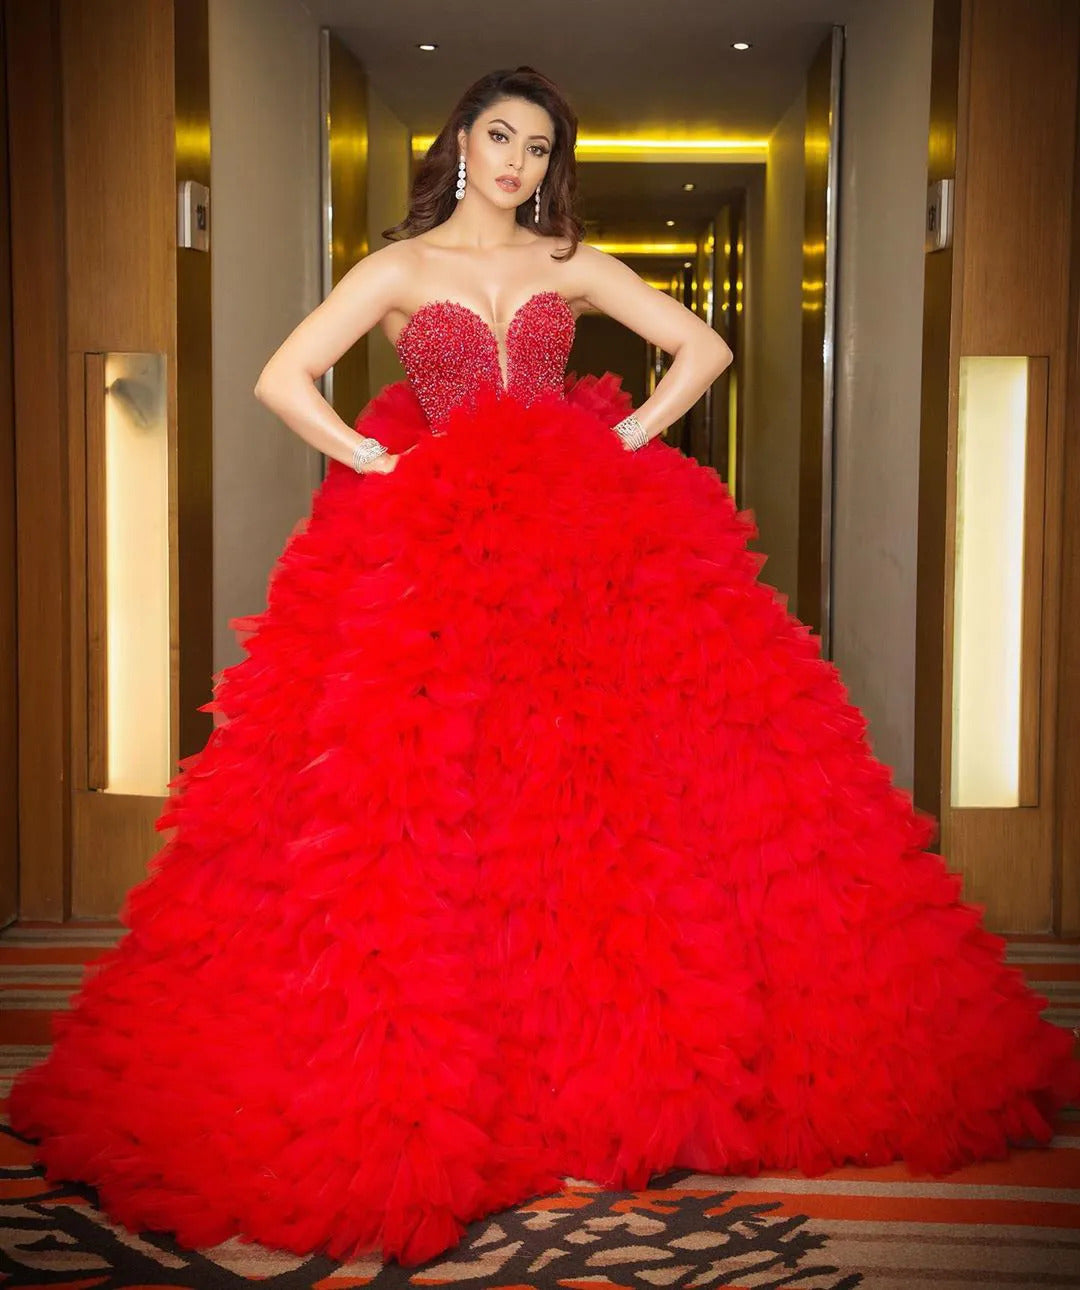 Urvashi Rautela sat on 4 chairs at Filmfare Awards 2020; here’s why